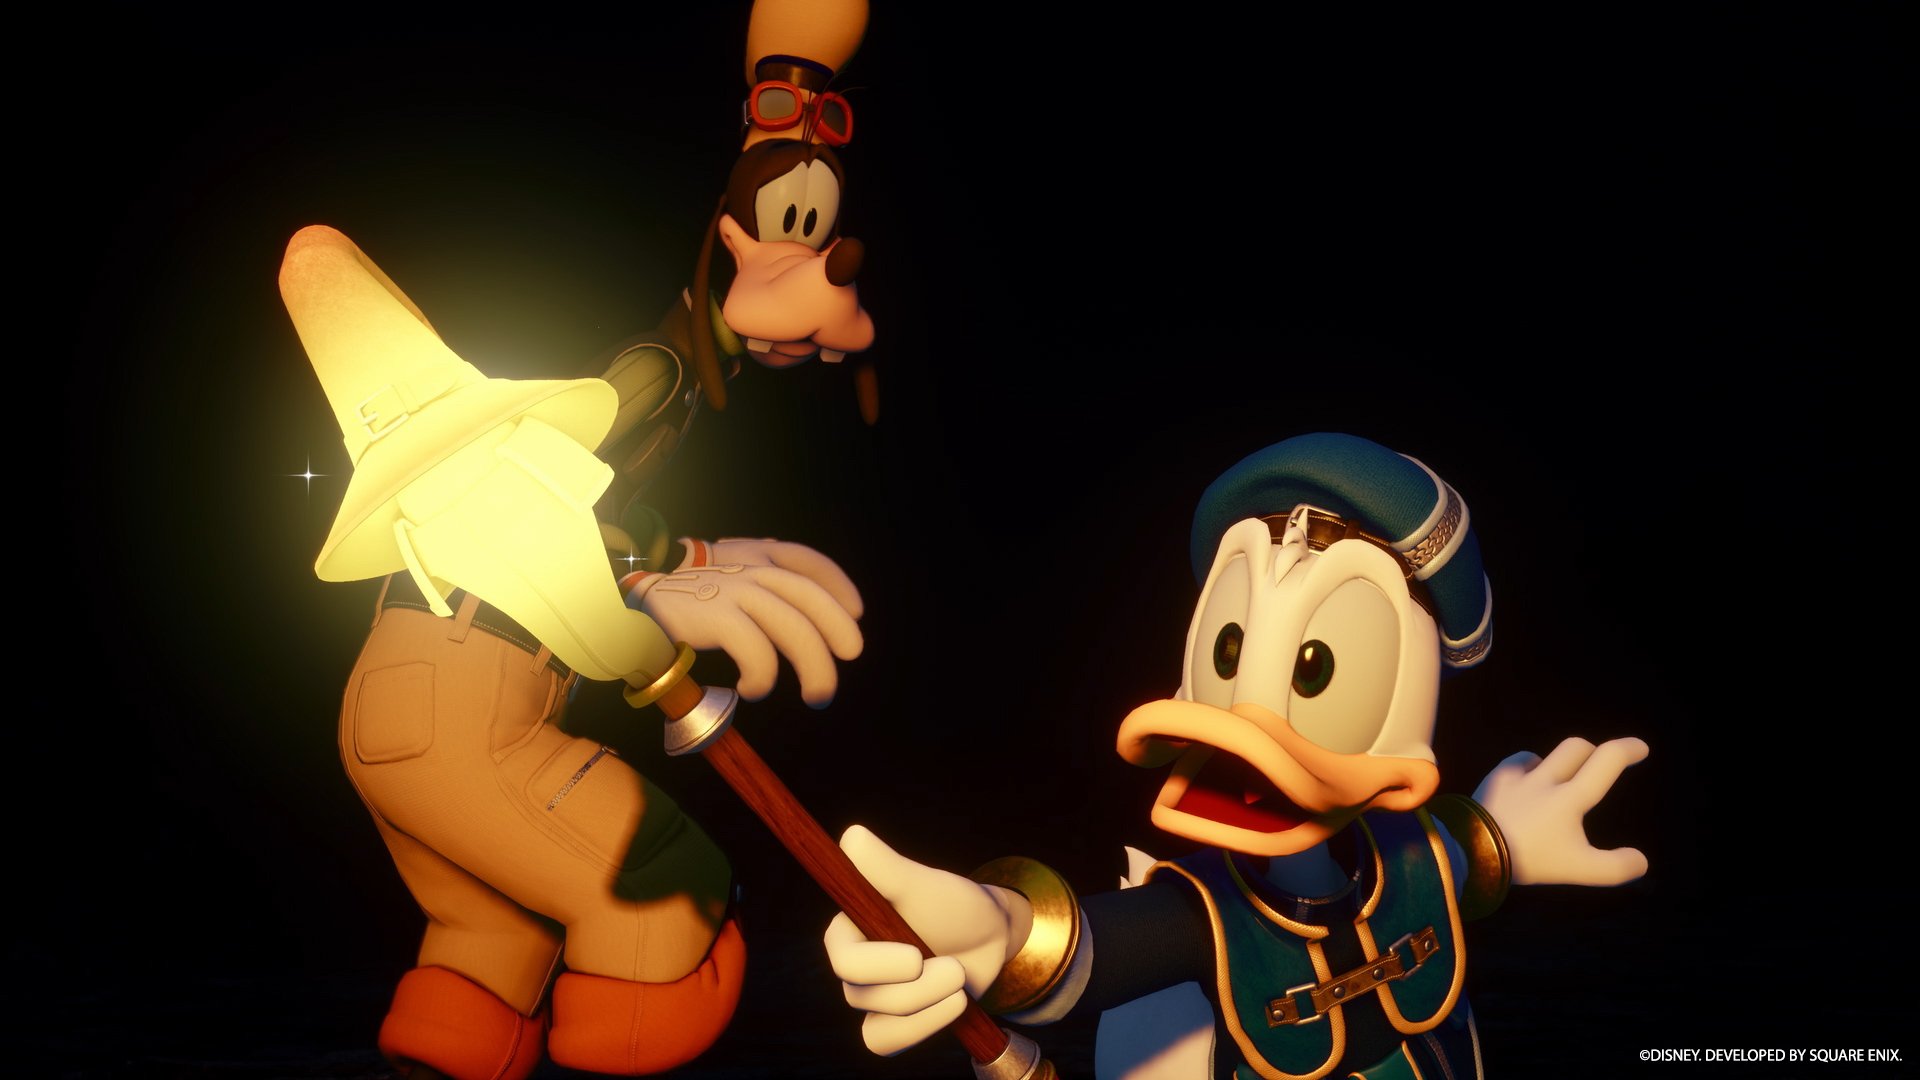 Kingdom Hearts 4: Release Date, Gameplay, Platforms and More